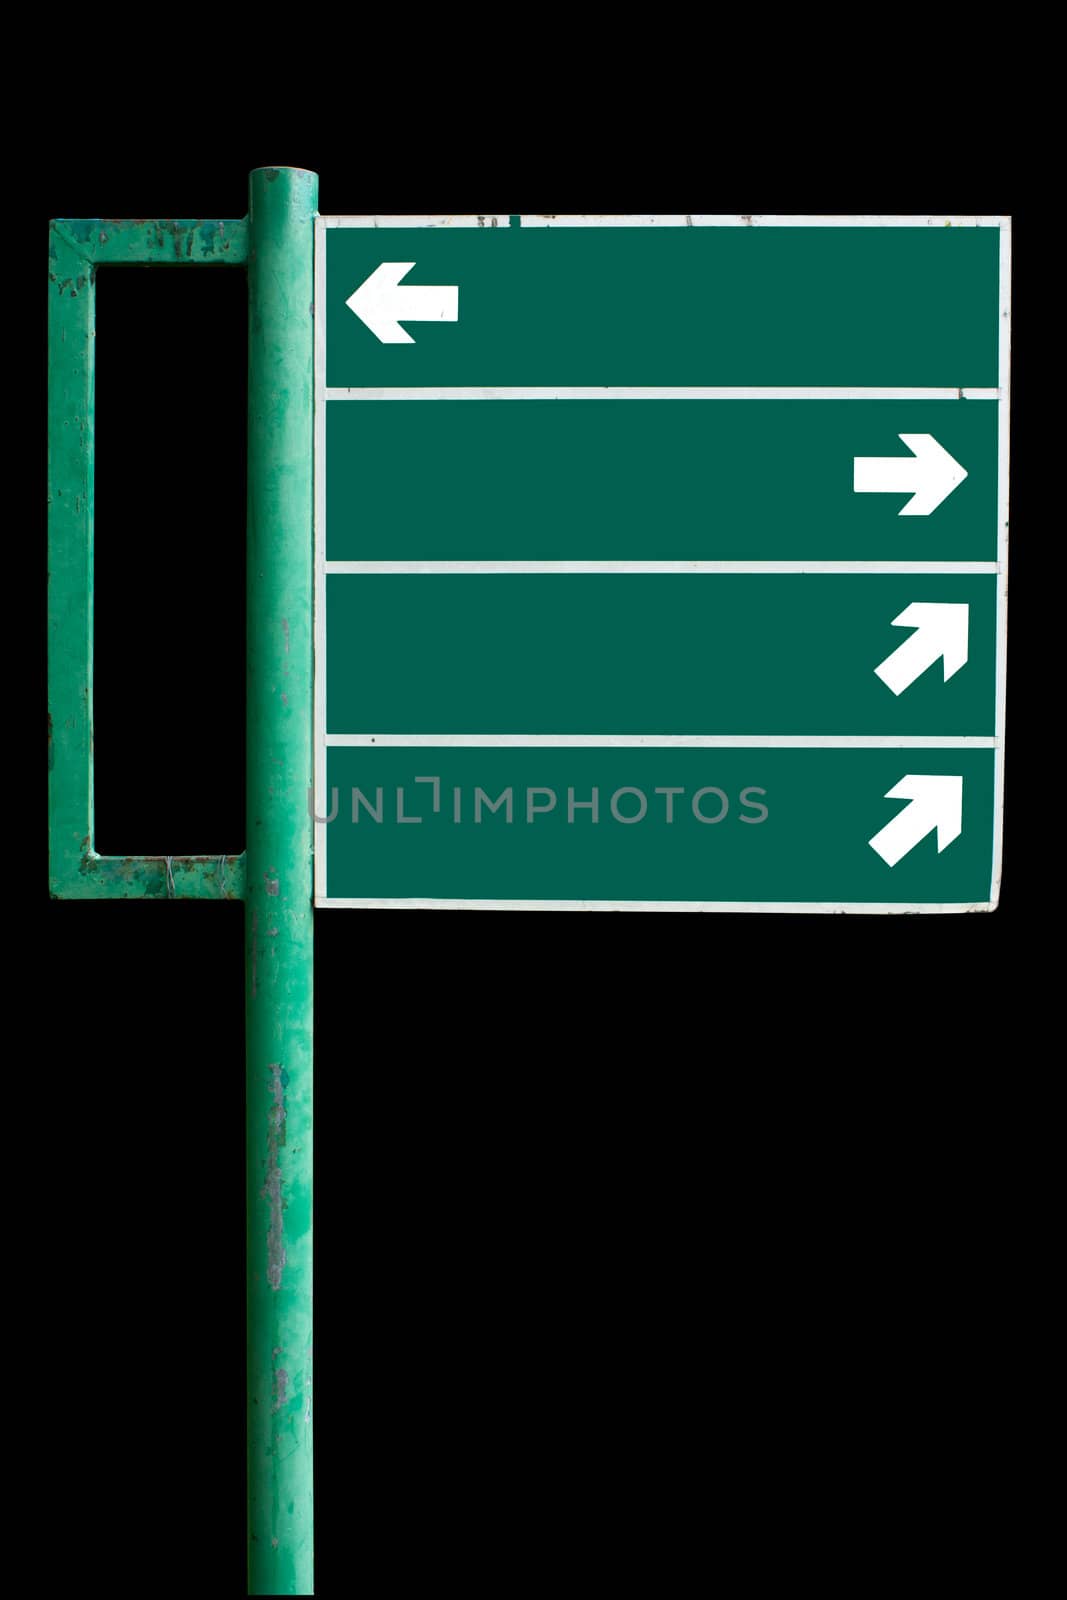 Signs advertising a green background isolated black background.